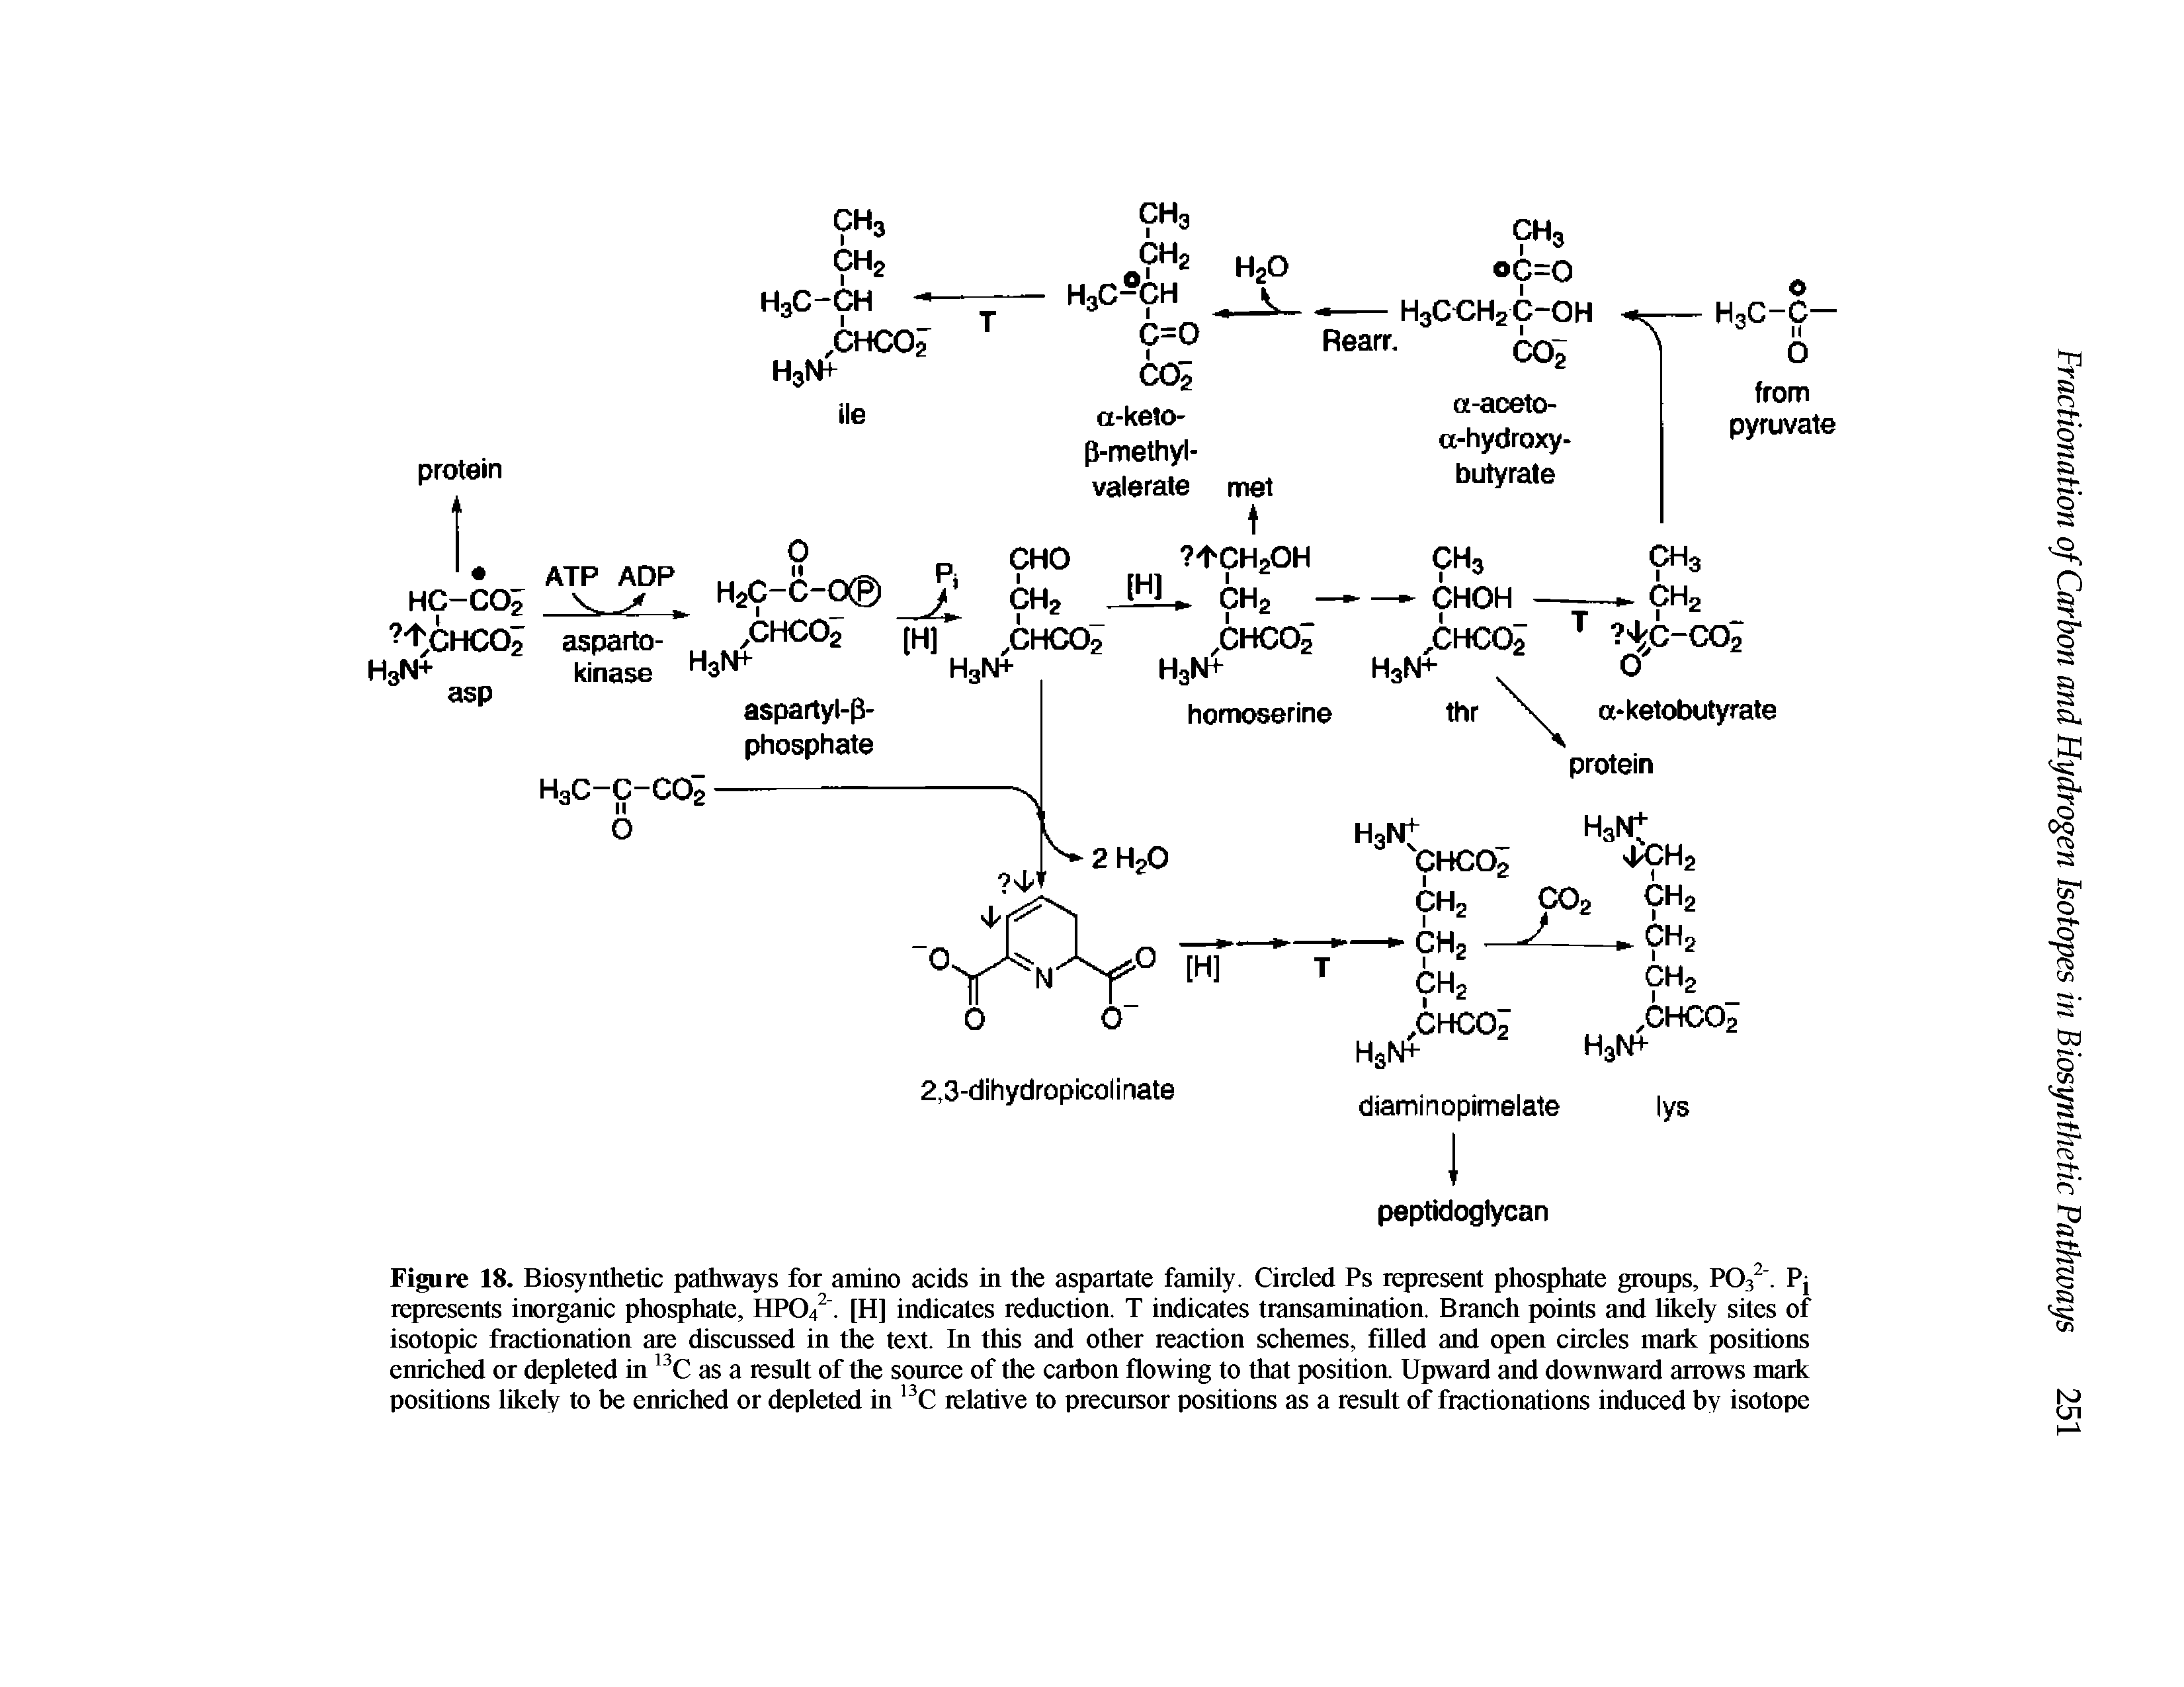 Figure 18. Biosynthetic pathways for amino acids in the aspartate family. Circled Ps represent phosphate groups, POs. Pj represents inorganic phosphate, HPO/. [H] indicates reduction. T indicates transamination. Branch points and likely sites of isotopic fractionation are discussed in the text. In this and other reaction schemes, filled and open circles mark positions enriched or depleted in as a result of the source of the carbon flowing to that position. Upward and downward arrows mark positions likely to be enriched or depleted in C relative to precursor positions as a result of fractionations induced by isotope...